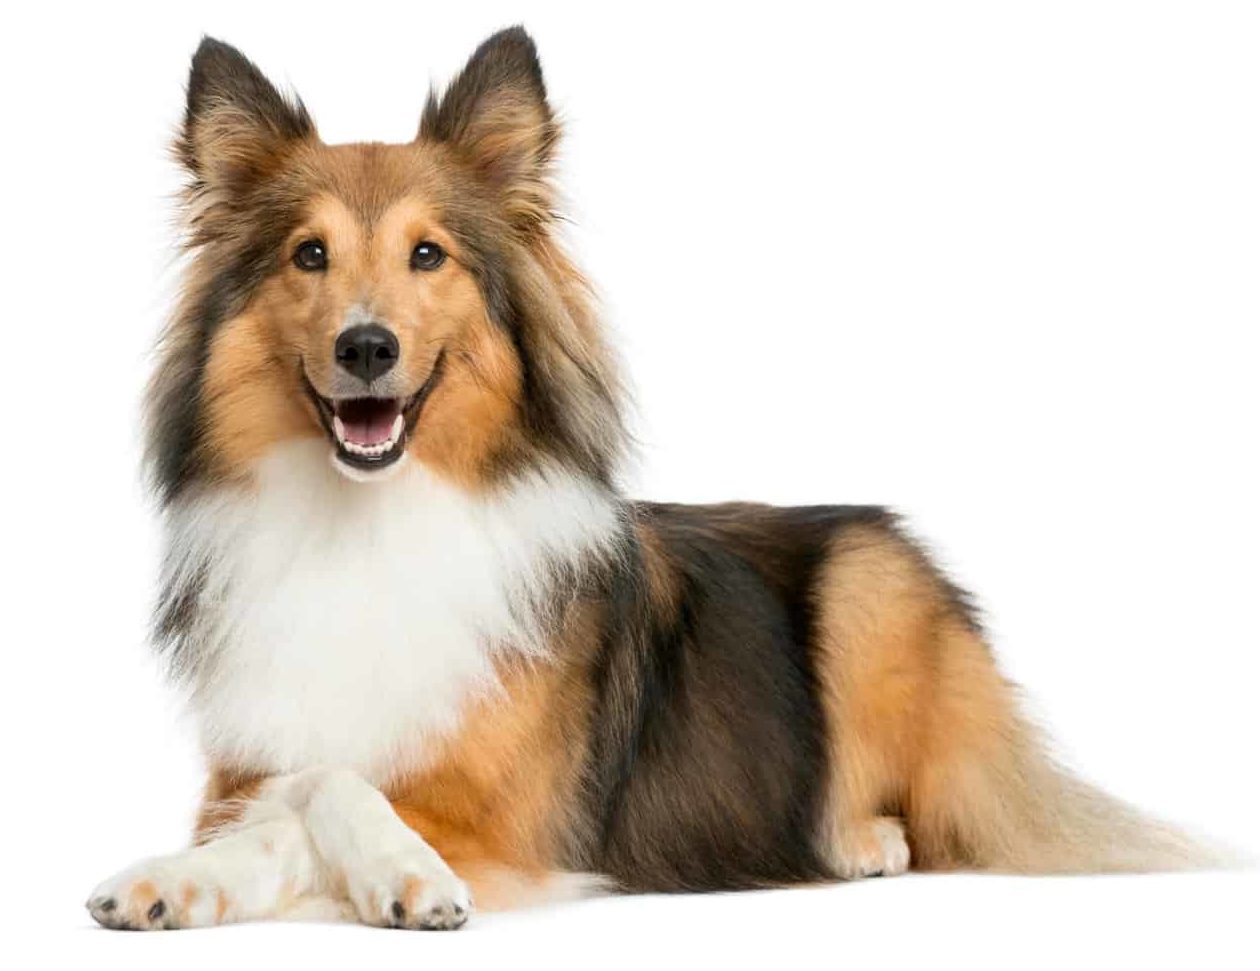 Happy Shetland Sheepdog. Keeping your fluffy dog clean and healthy doesn't have to be complicated. Simply brush, bathe, use a pet hair dryer, and feed a healthy diet.